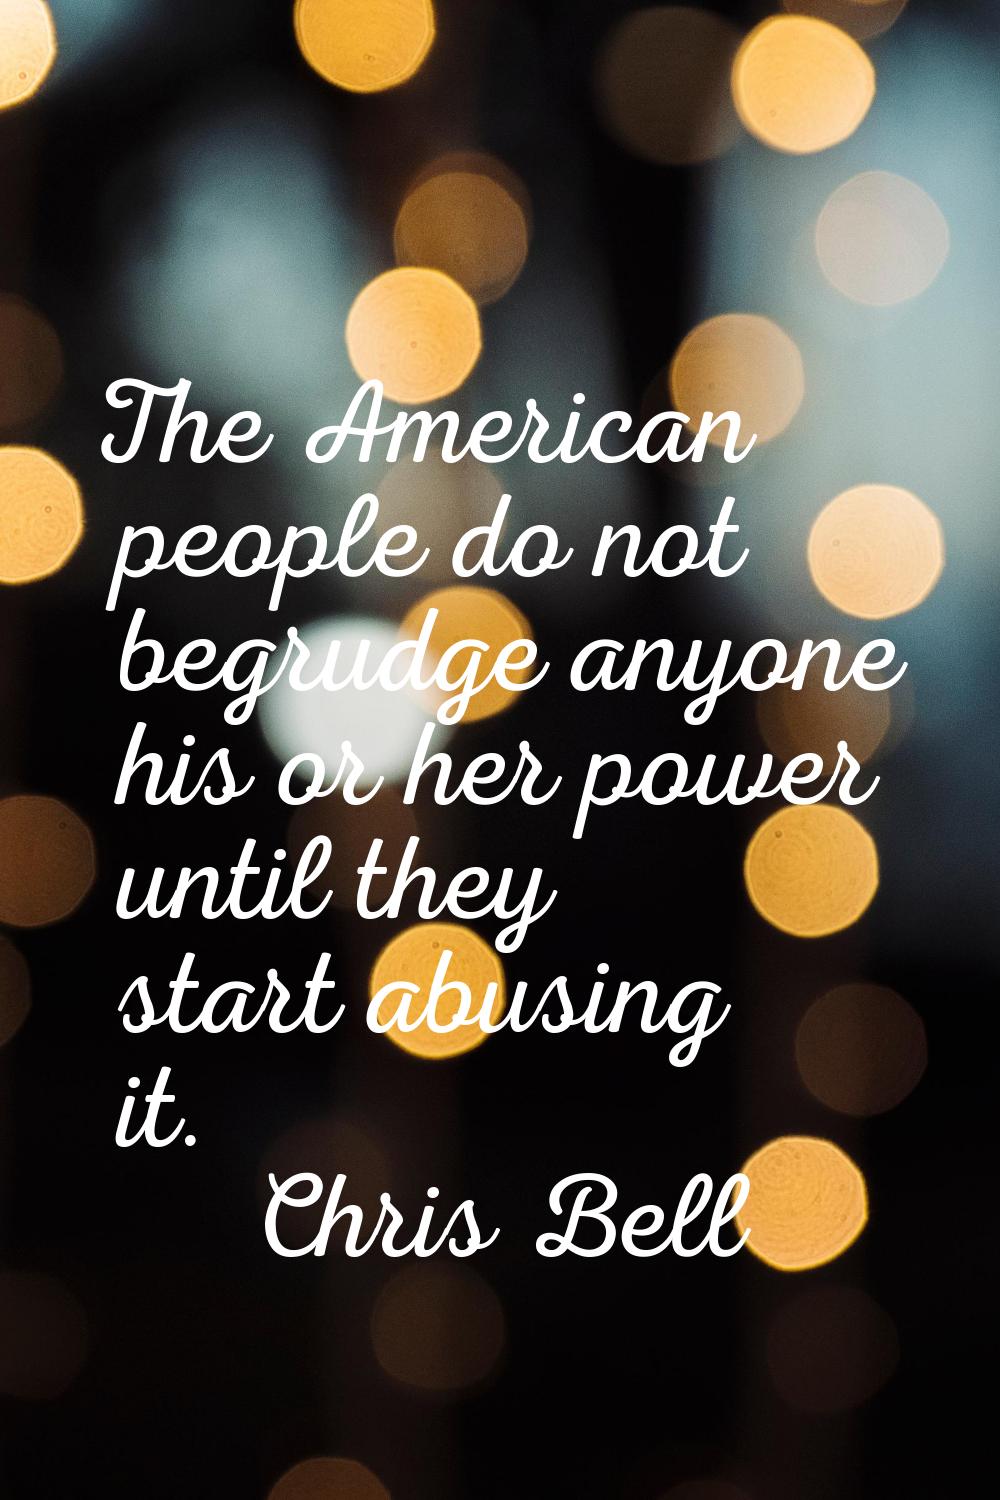 The American people do not begrudge anyone his or her power until they start abusing it.